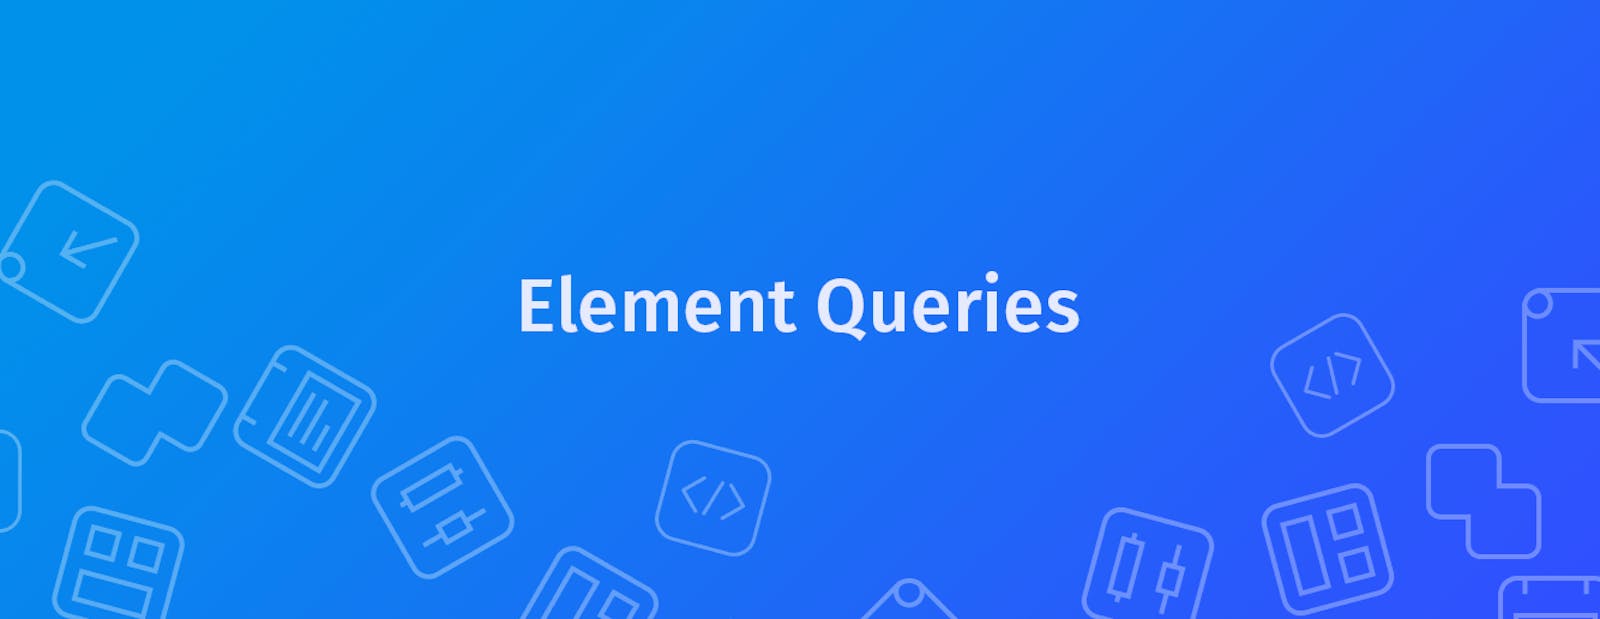 Why I Love Element Queries & You Should Too!